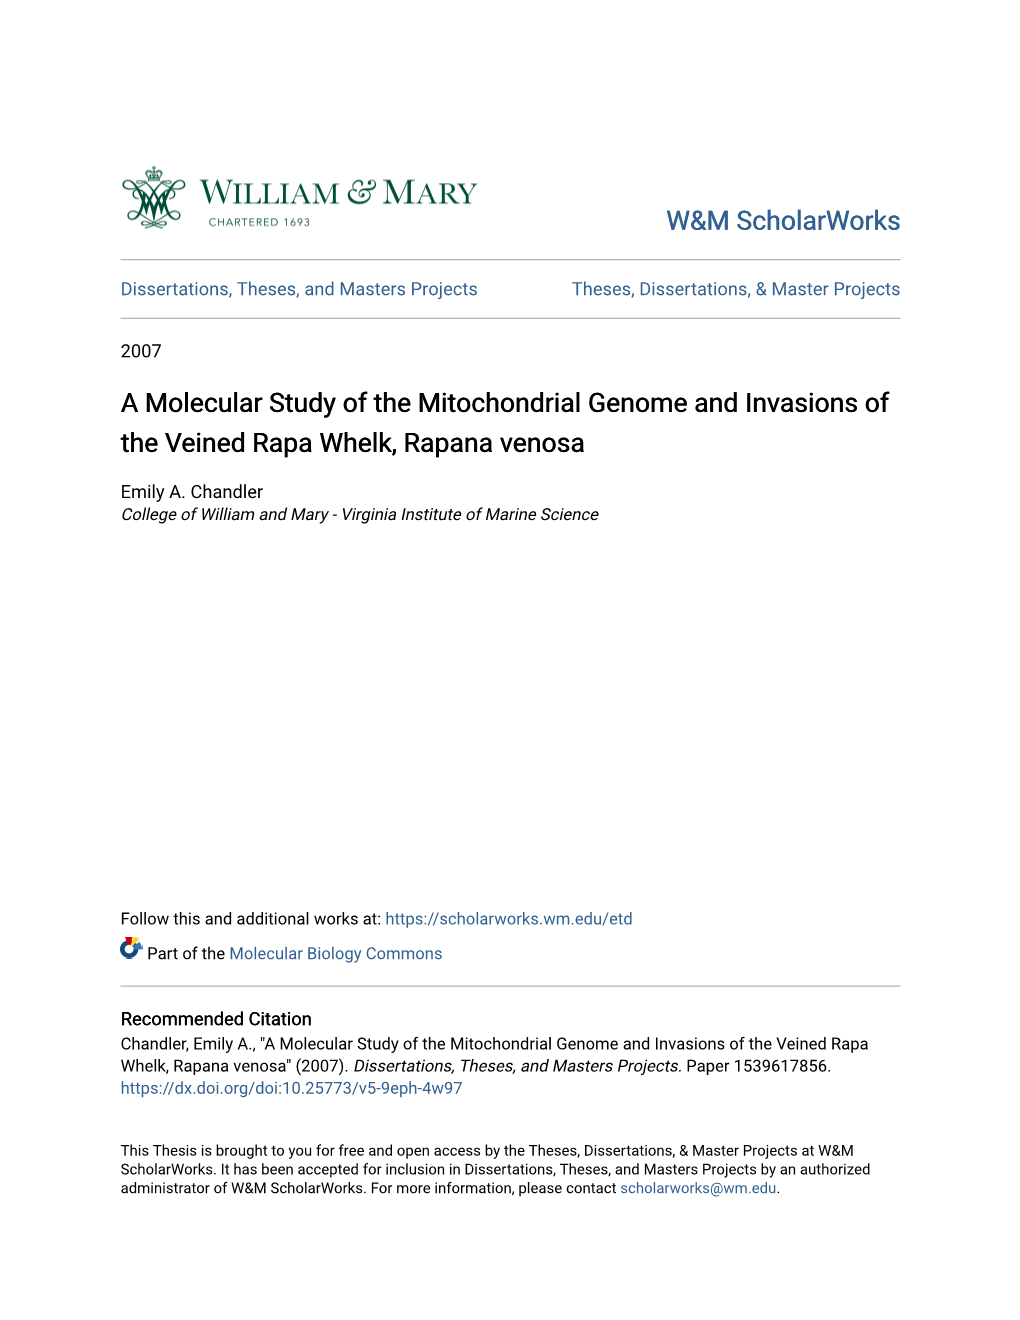 A Molecular Study of the Mitochondrial Genome and Invasions of the Veined Rapa Whelk, Rapana Venosa